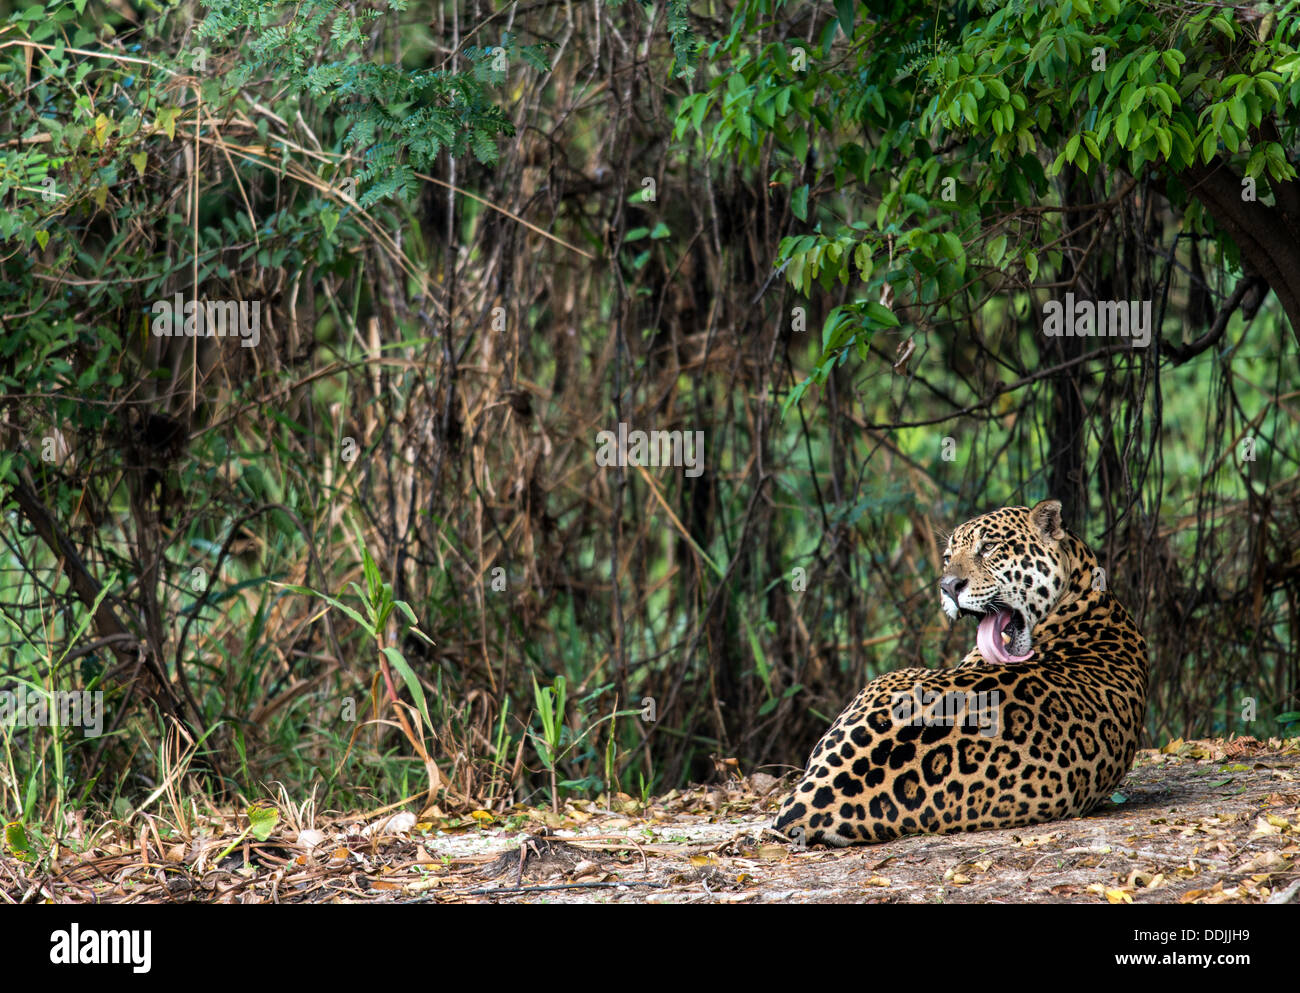 Jaguar (Panthera onca) relaxing alongside The Three Brothers river in Pantanal Porto Jofre Mato Grosso Brasil South America Stock Photo